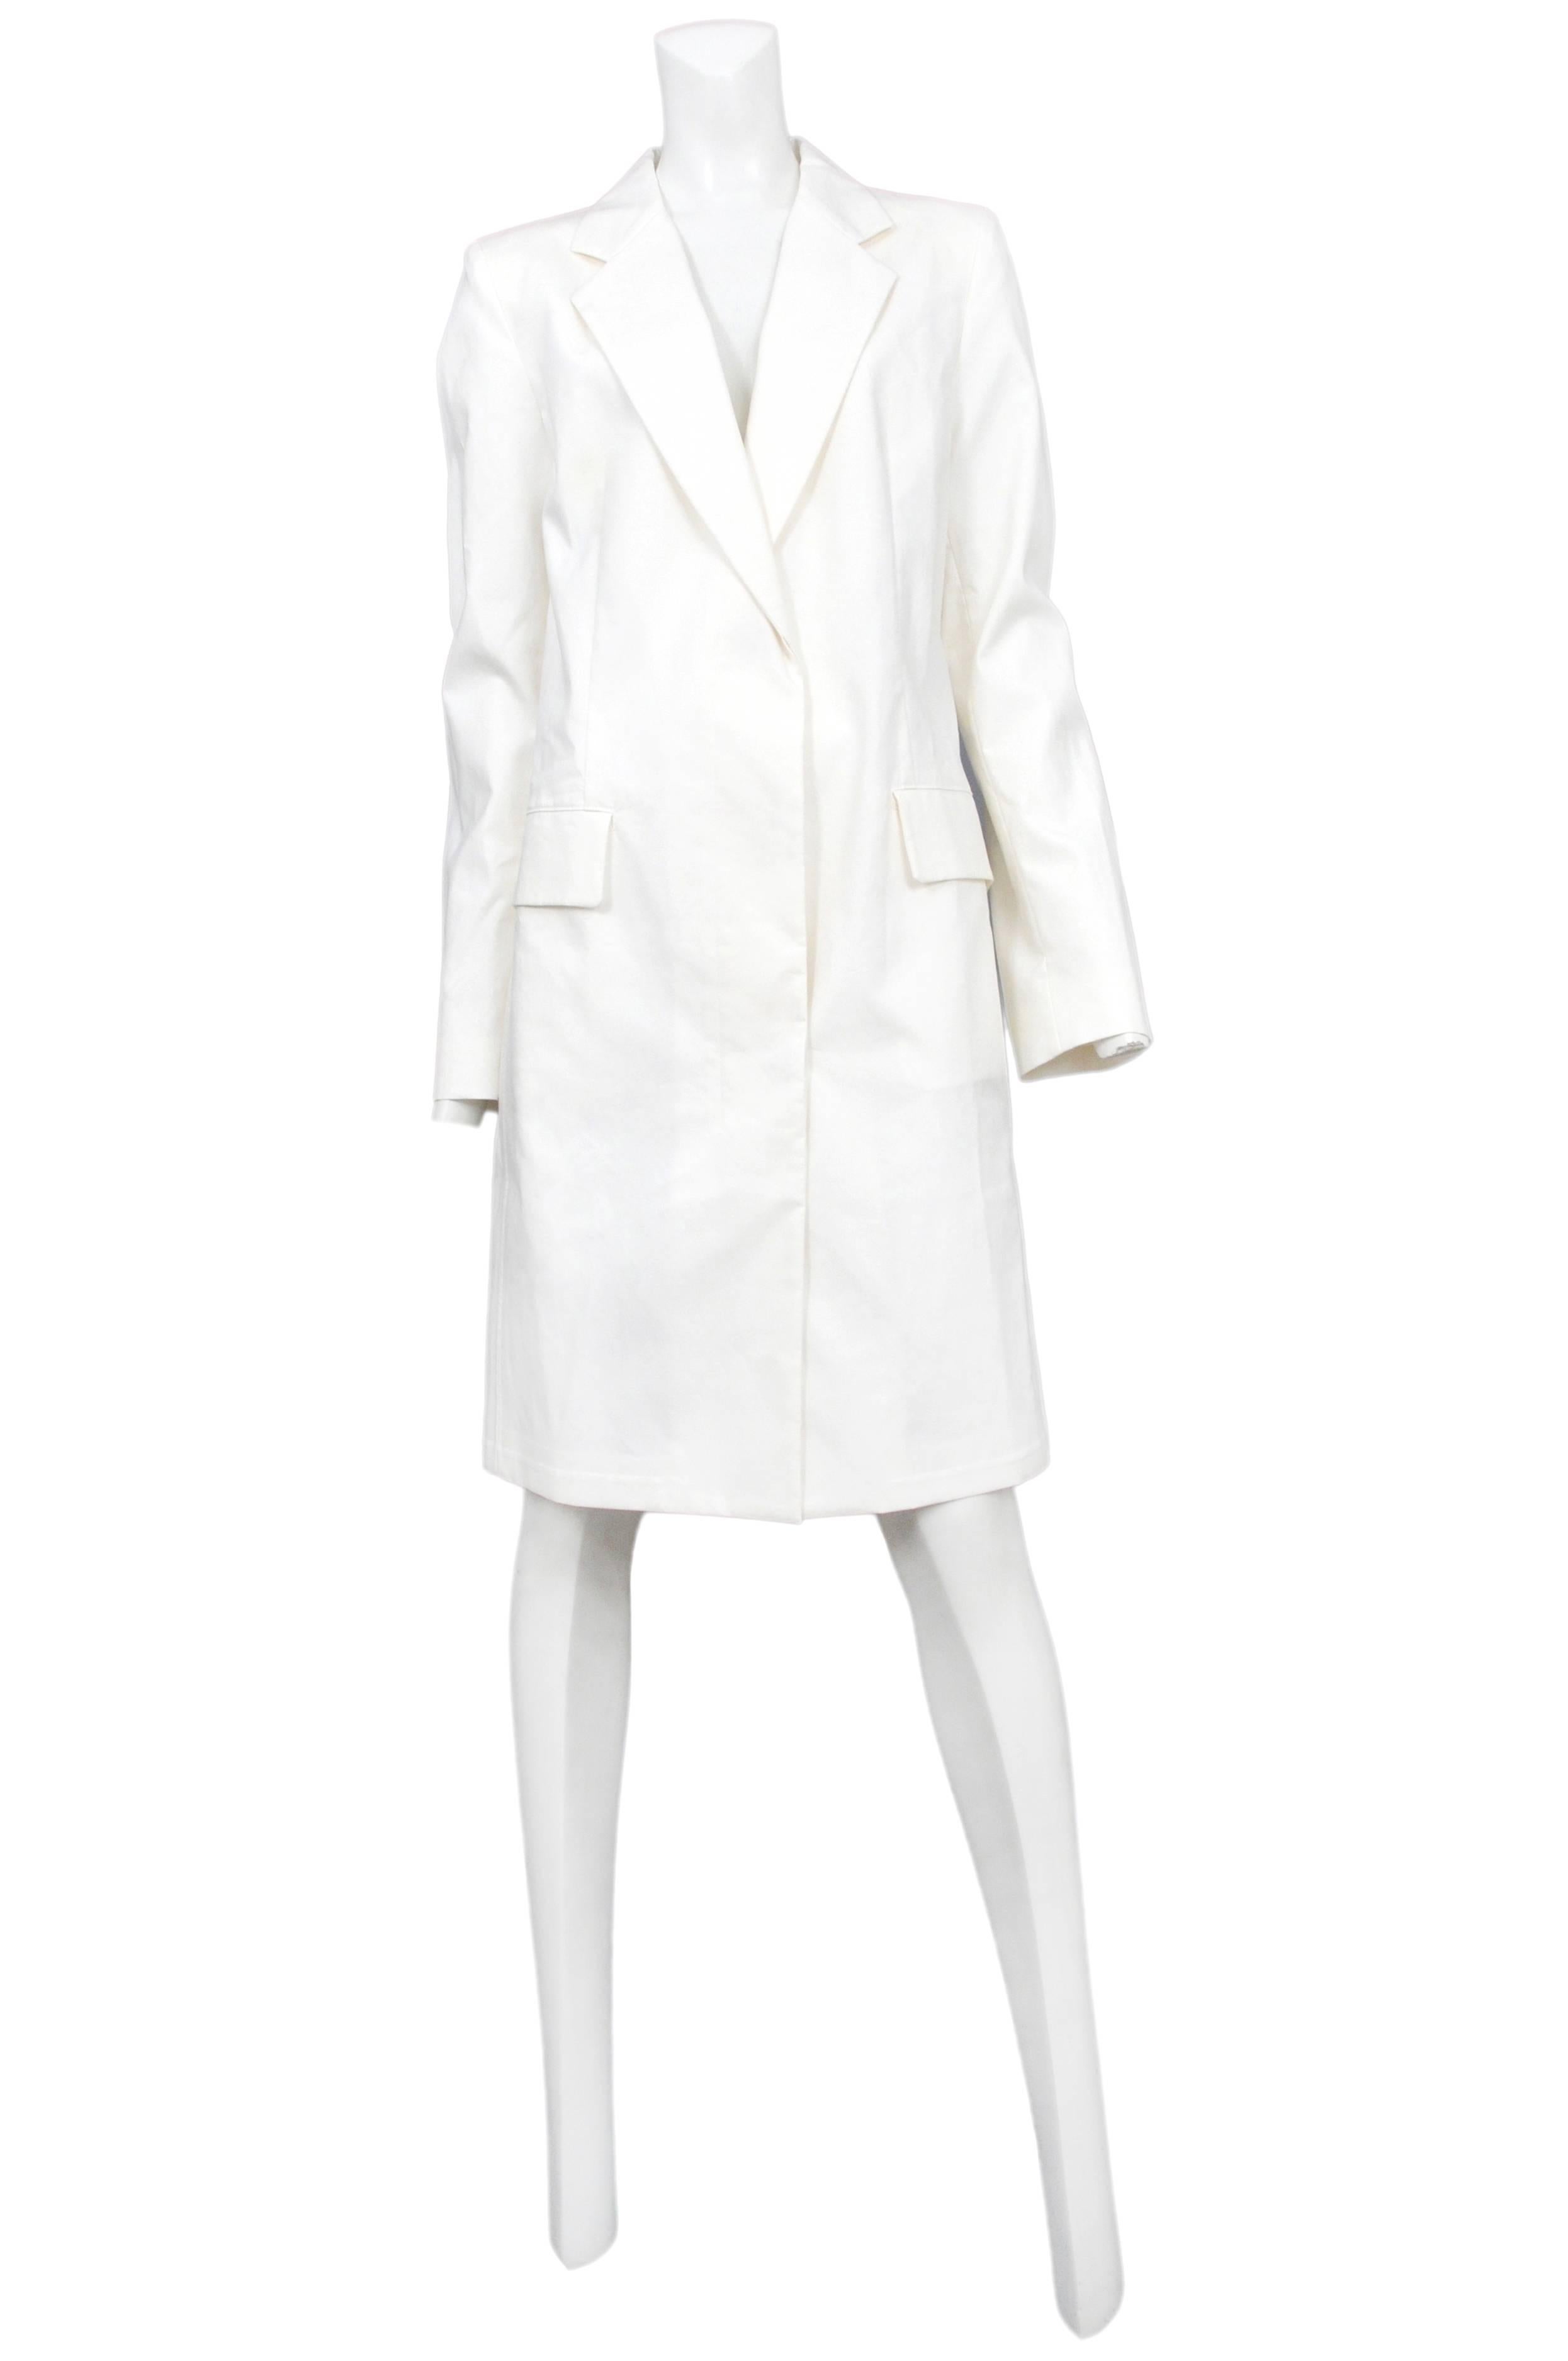 Vintage Maison Martin Margiela white above the knee lab coat featuring hidden buttons and side pockets.
Please inquire for additional images.